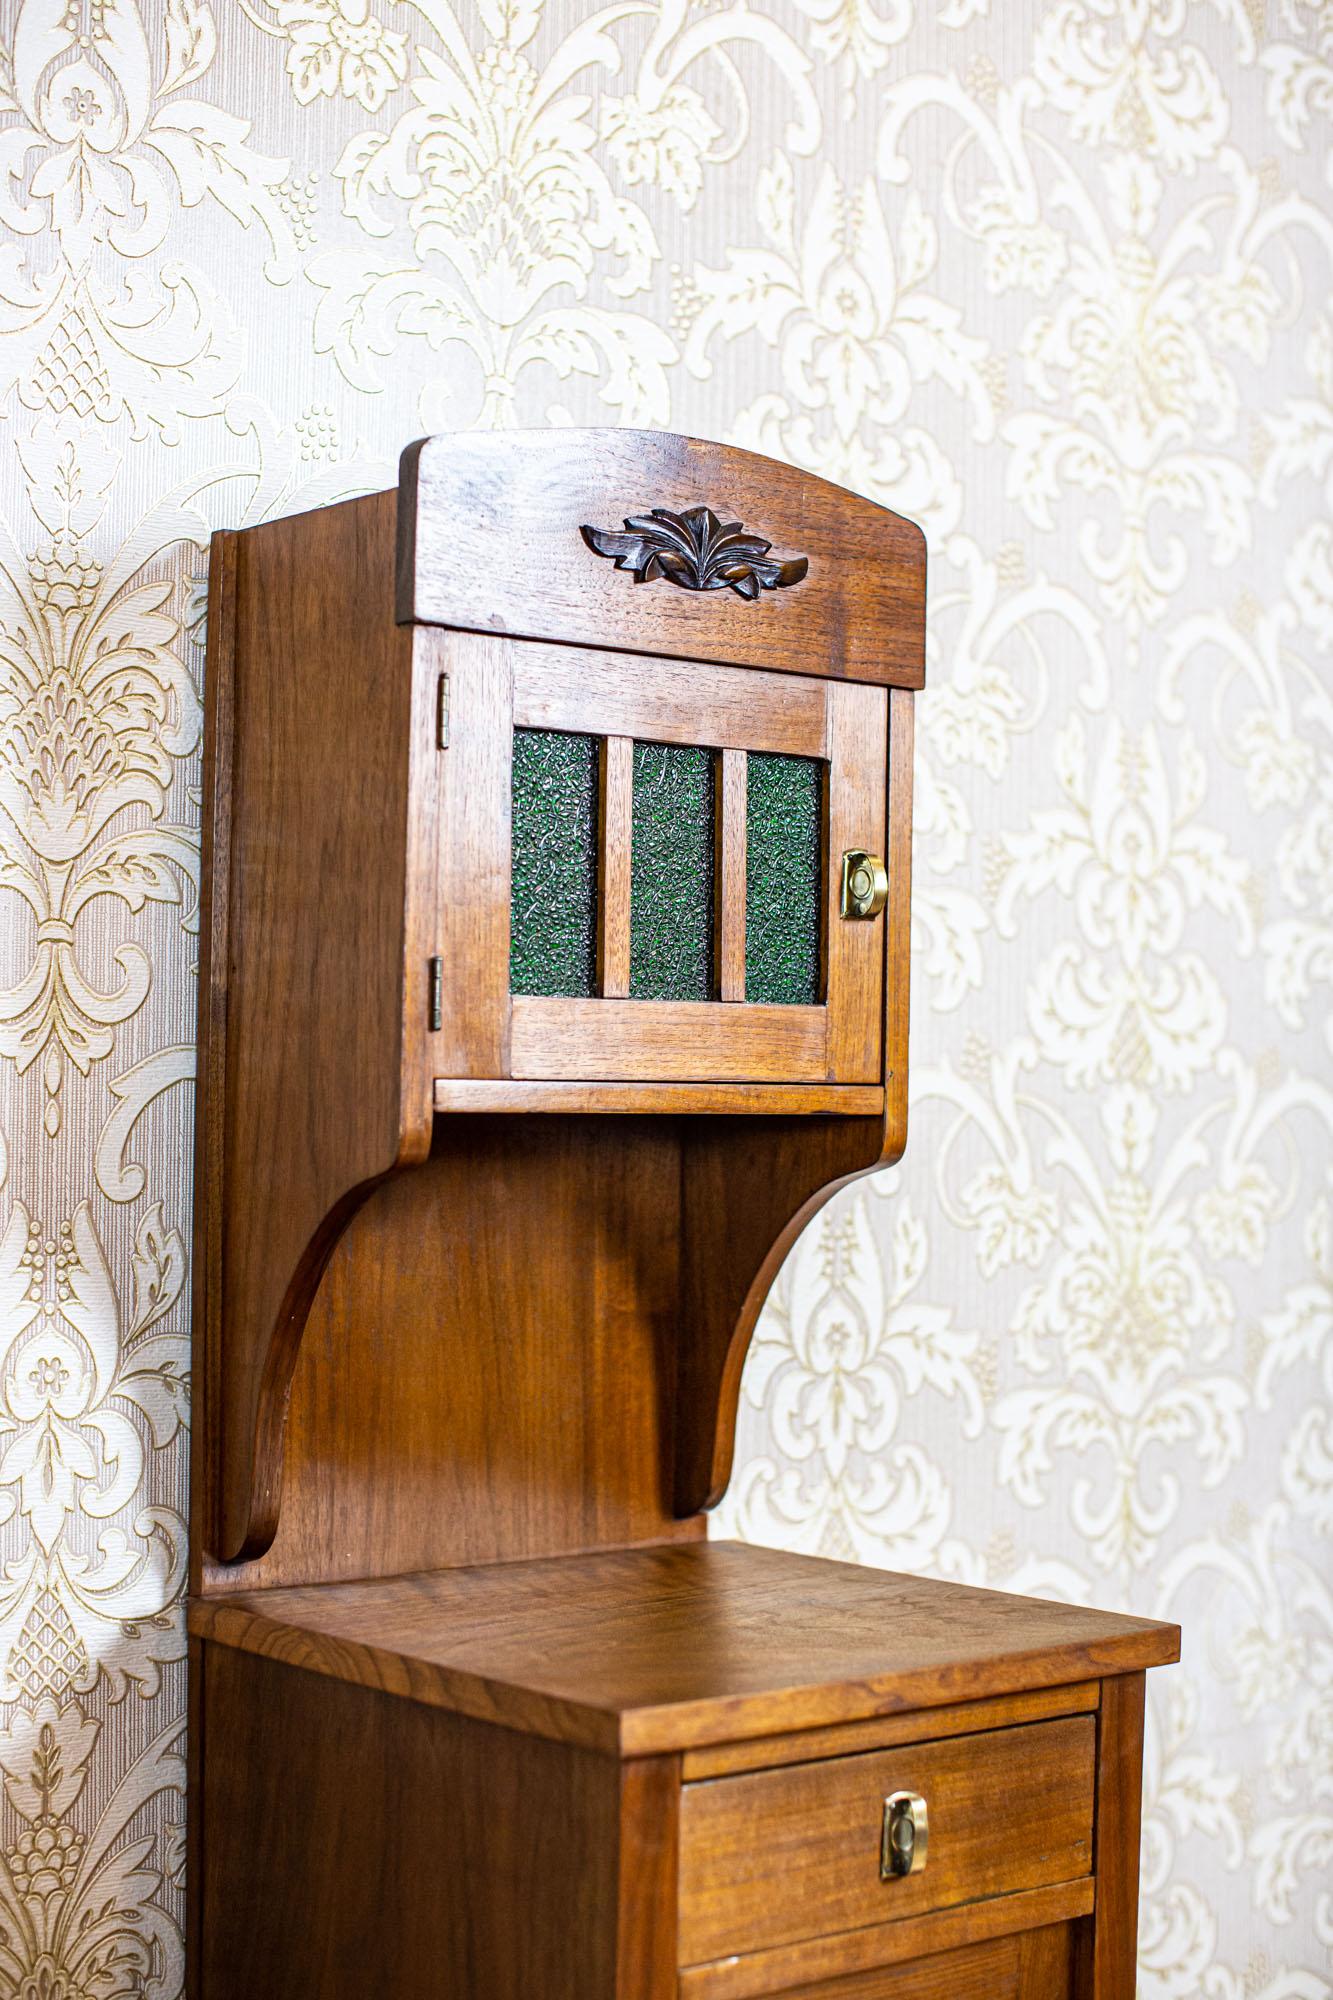 European Art Nouveau Walnut Nightstand from the Early 20th Century with Glass Pane For Sale